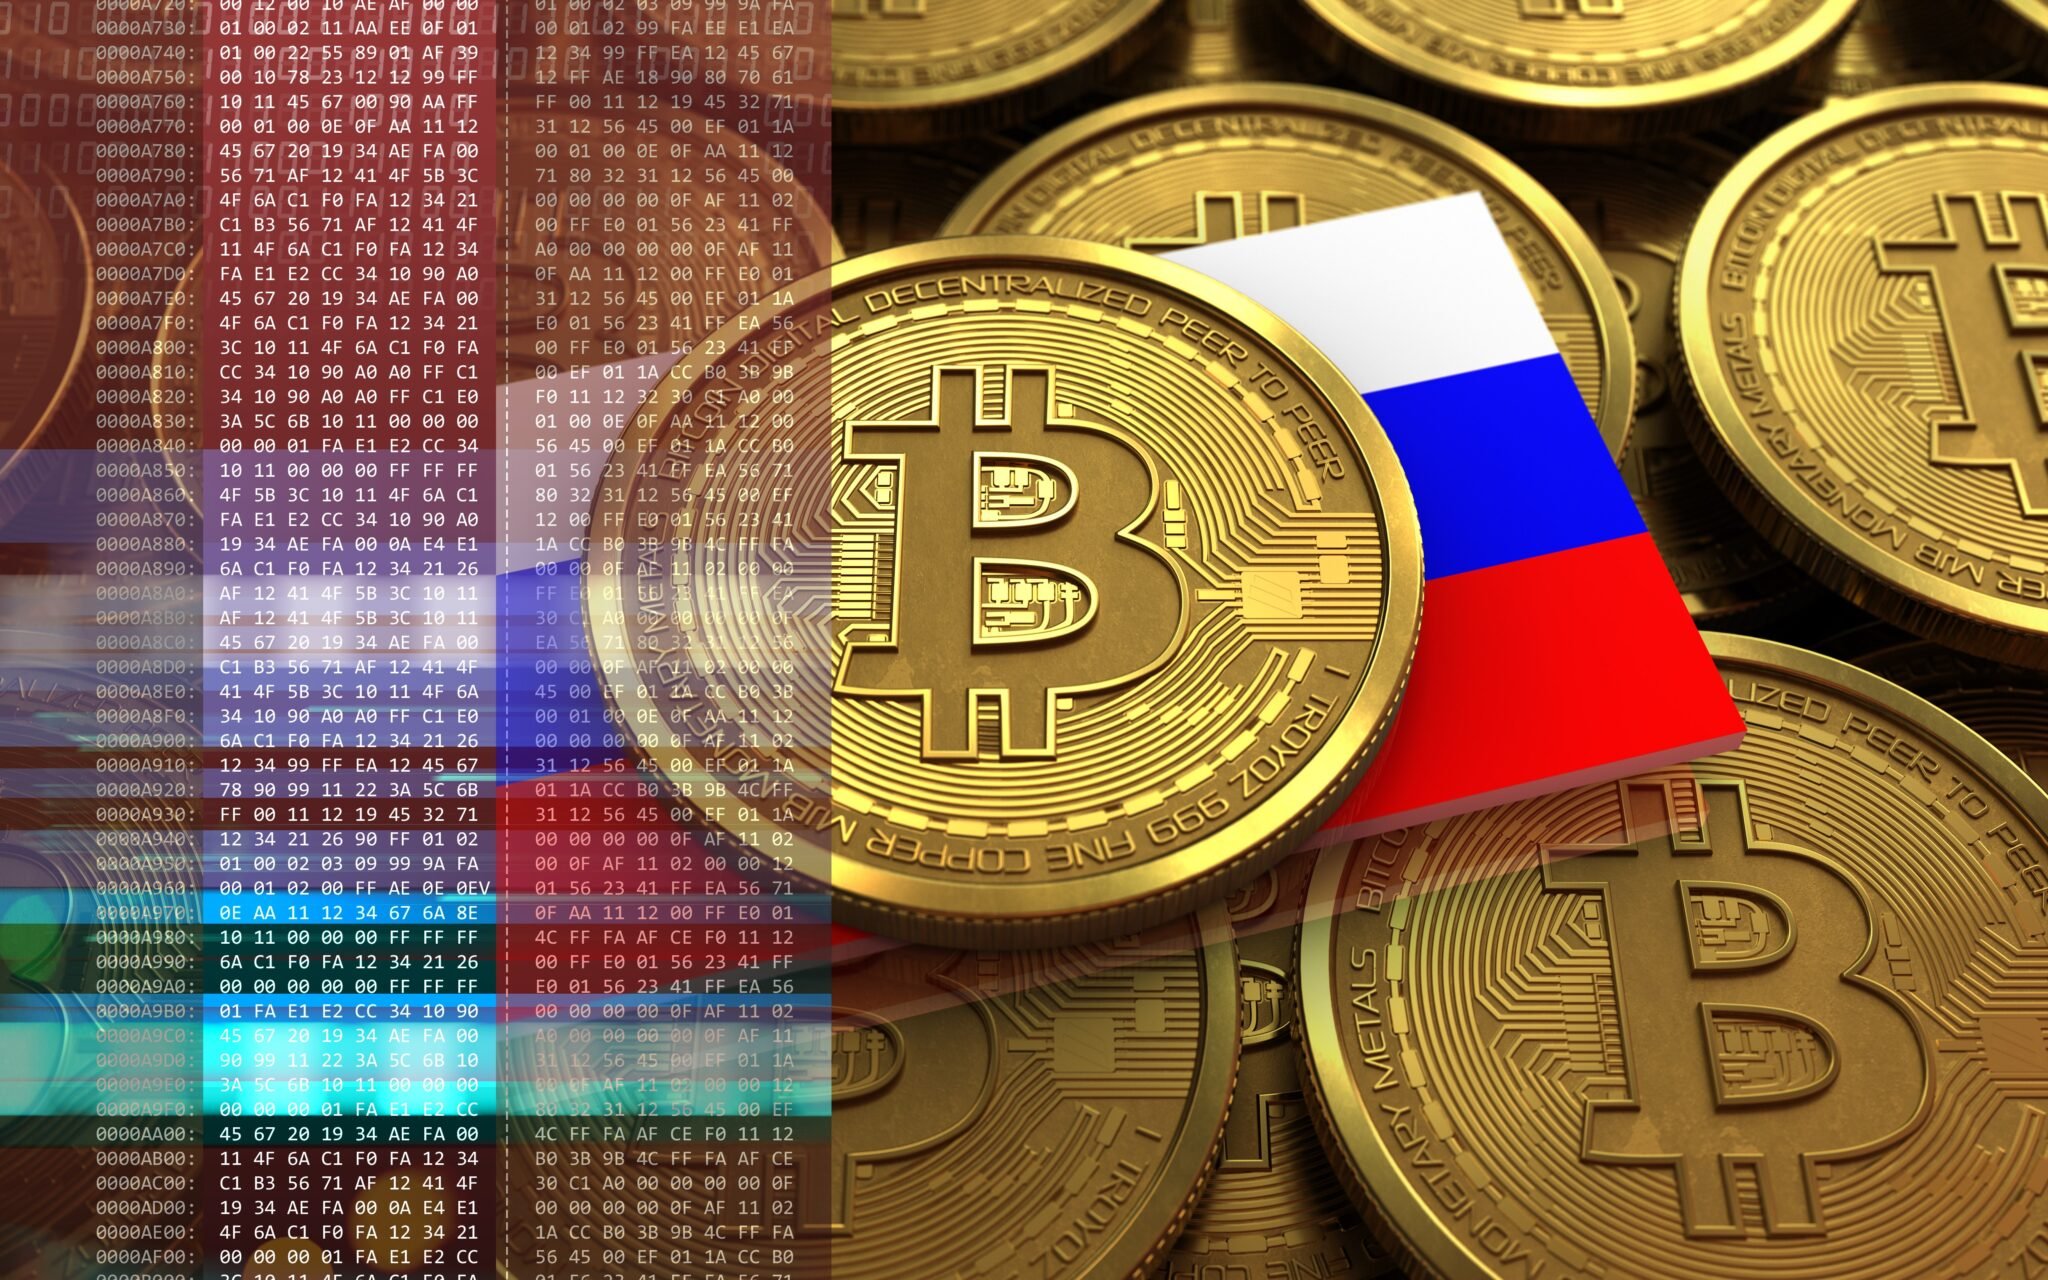 Russia could be a new encryption superpower